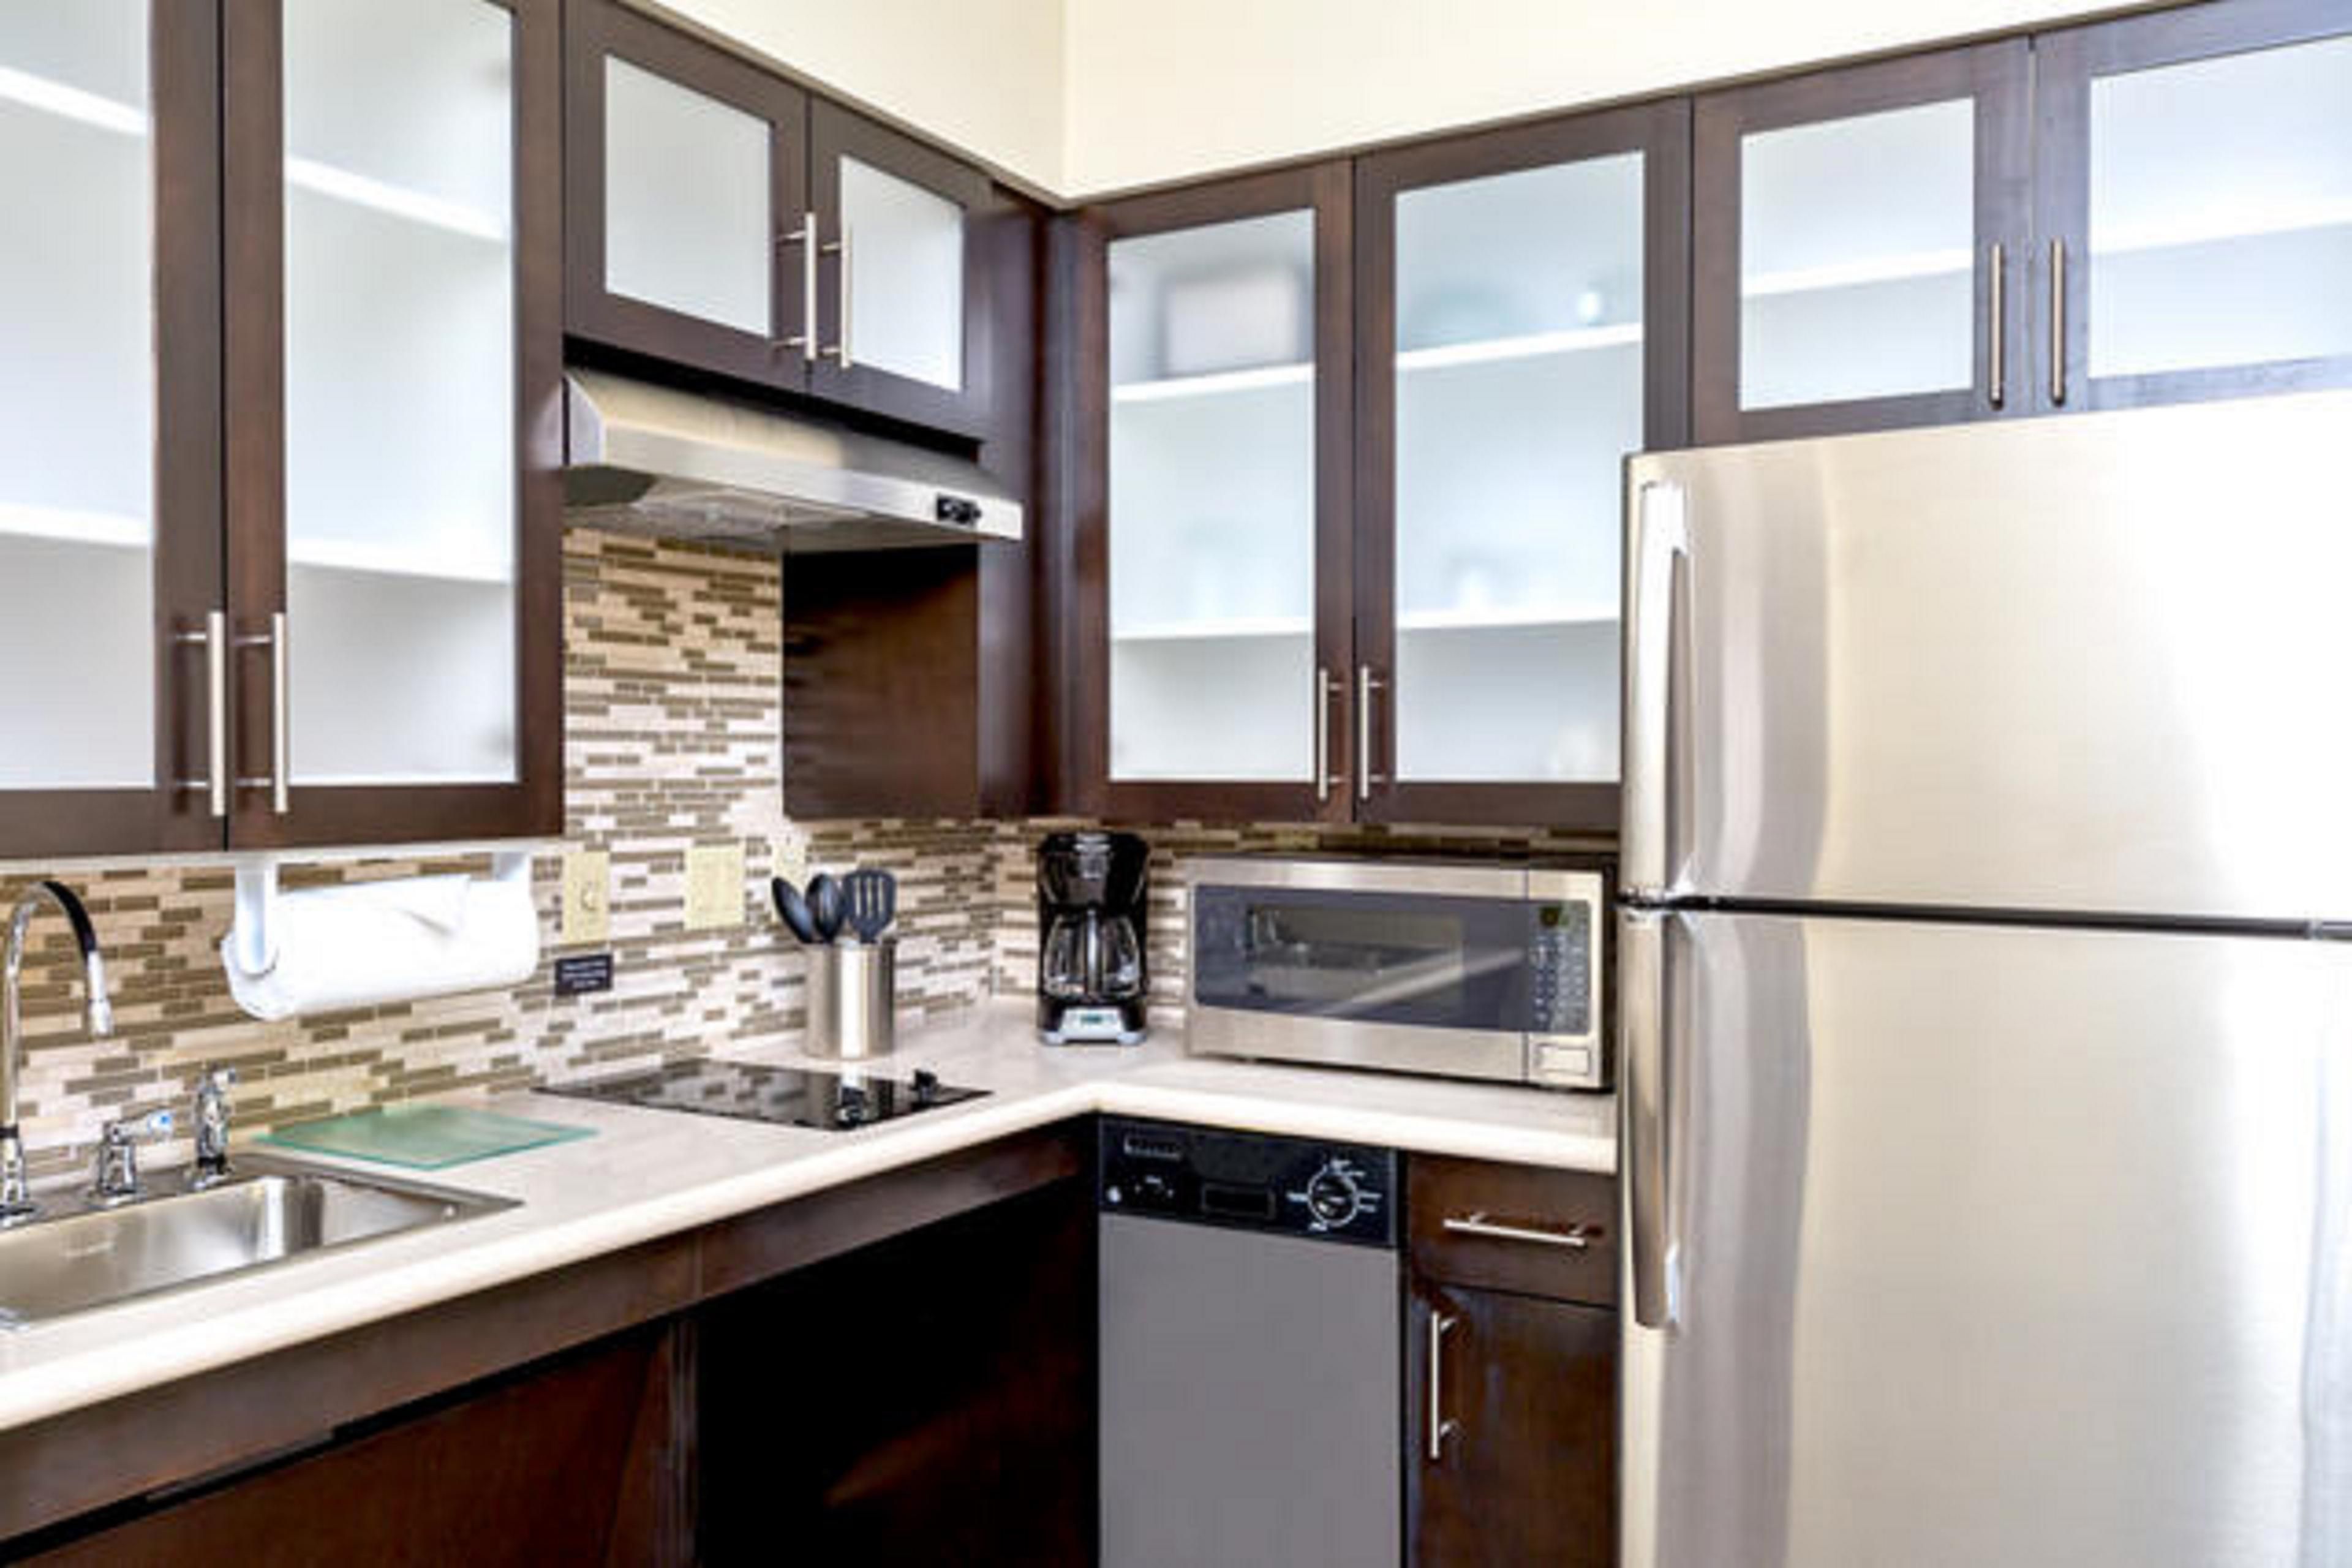 All suites have a fully equipped kitchen for your convenience including, a stove, full-size refrigerator, microwave, dishwasher, cooking and dining utensils, large coffee maker, and ample counter space.